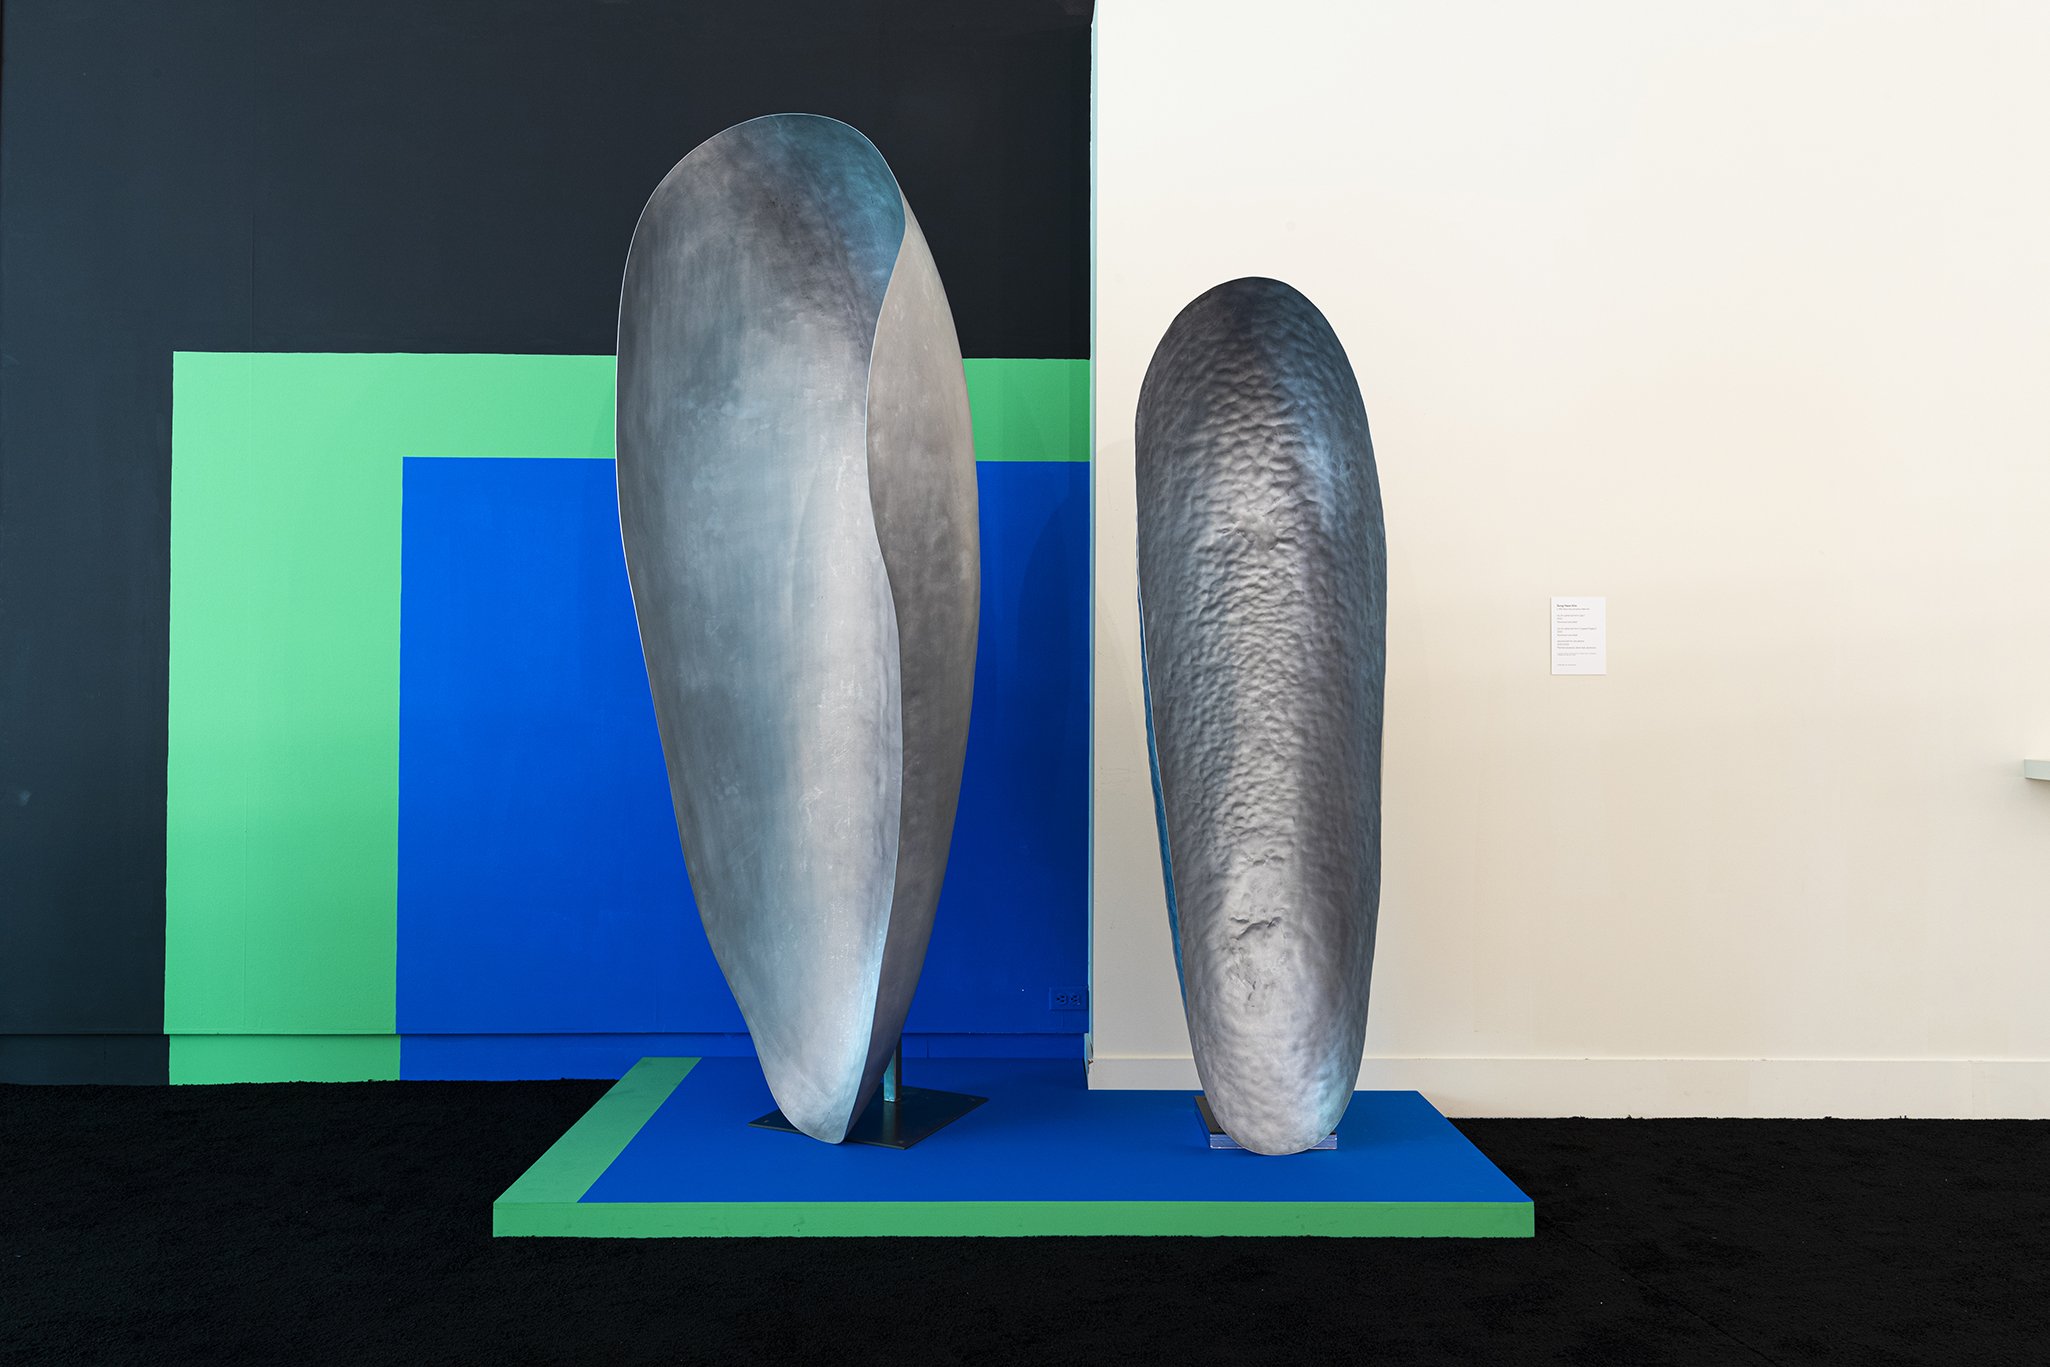   Sung Hwan Kim ,  tip of a spherical form (ear)  and  (cupped fingers) , 2021, HT22. Courtesy of Honolulu Museum of Art. 